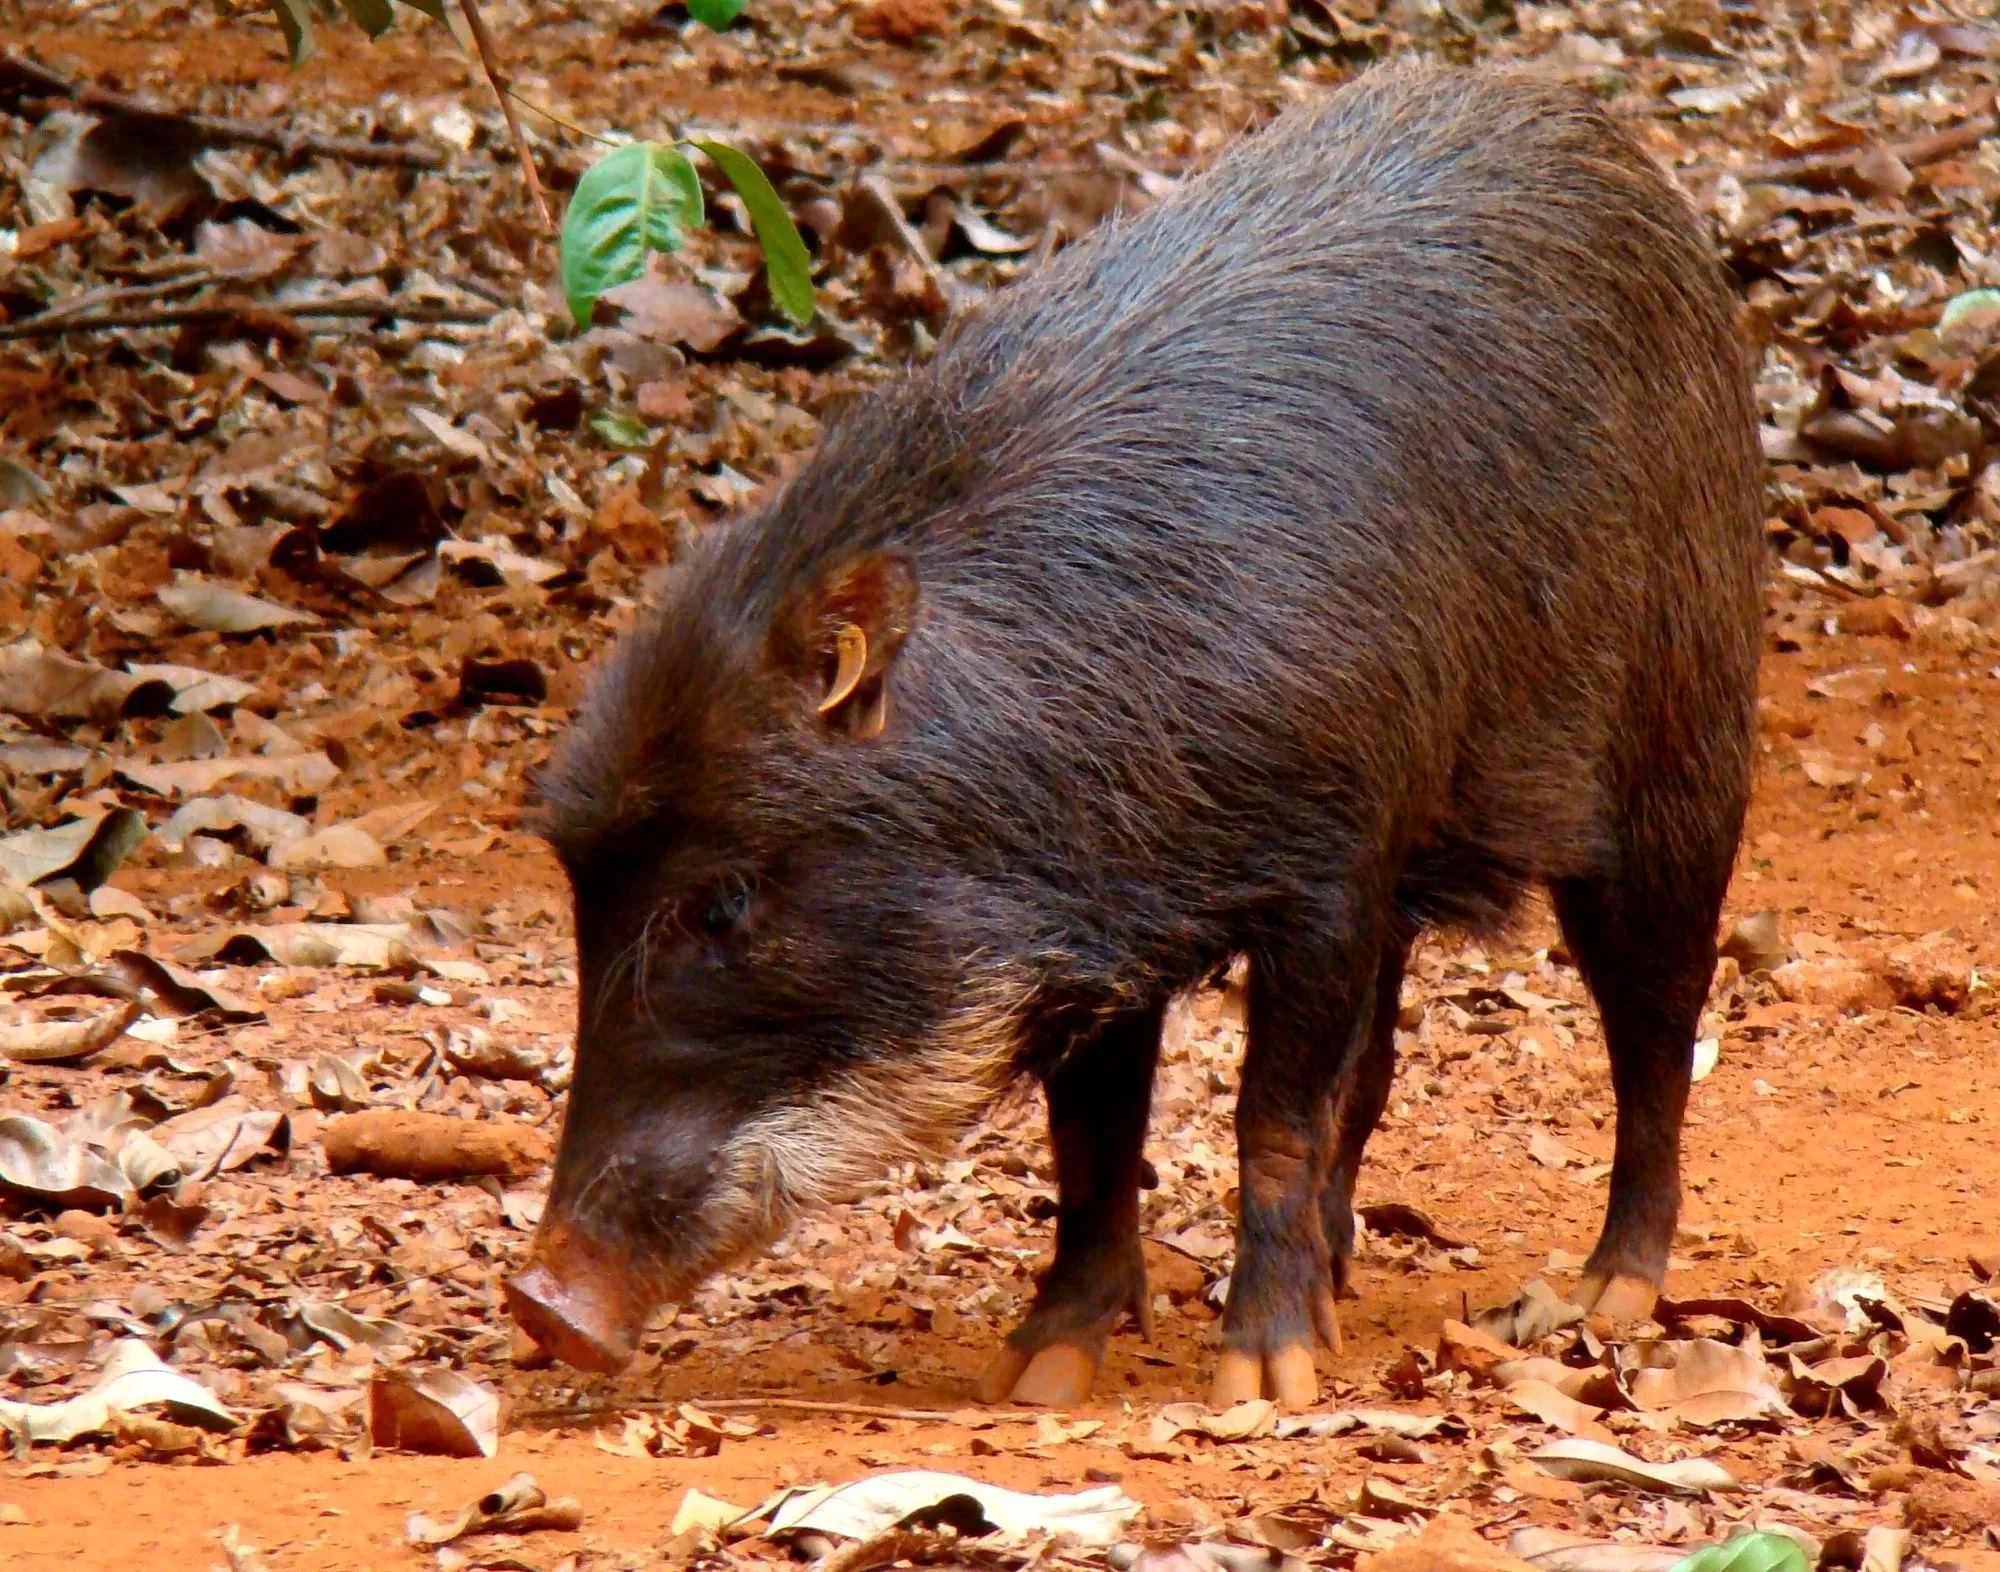 White-lipped peccaries have a gestation period of 162 days.